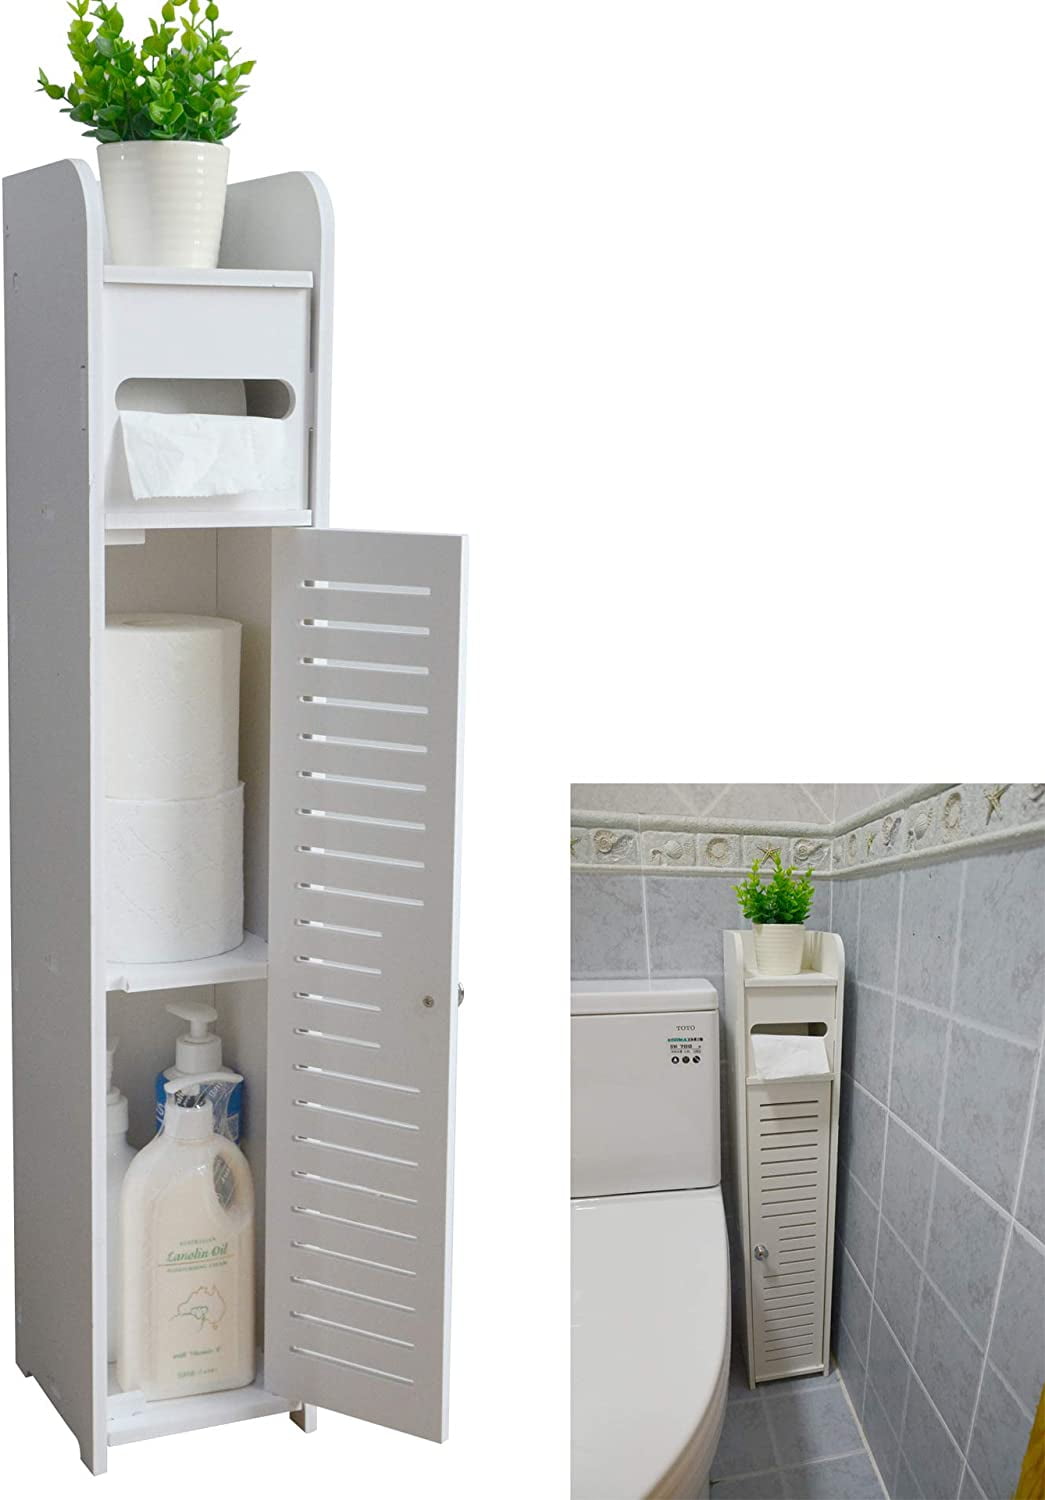 Toilet Paper Storage Cabinet Bathroom Floor Storage Cabinet Small Bathroom Storage Corner Floor Cabinet with Doors and Shelves White